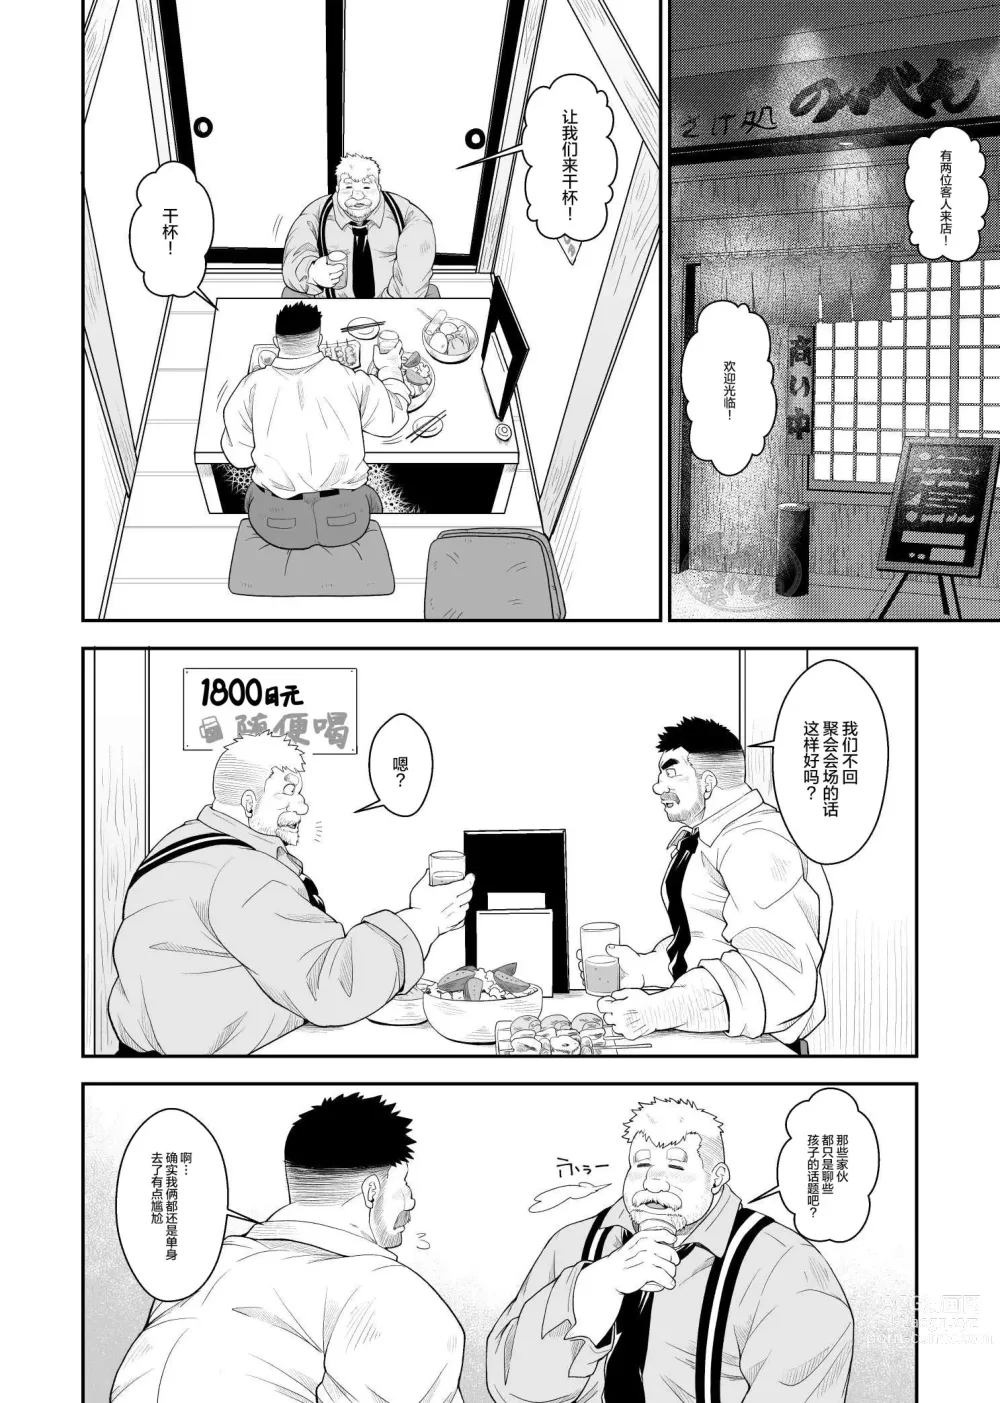 Page 7 of doujinshi 肉欲同学会